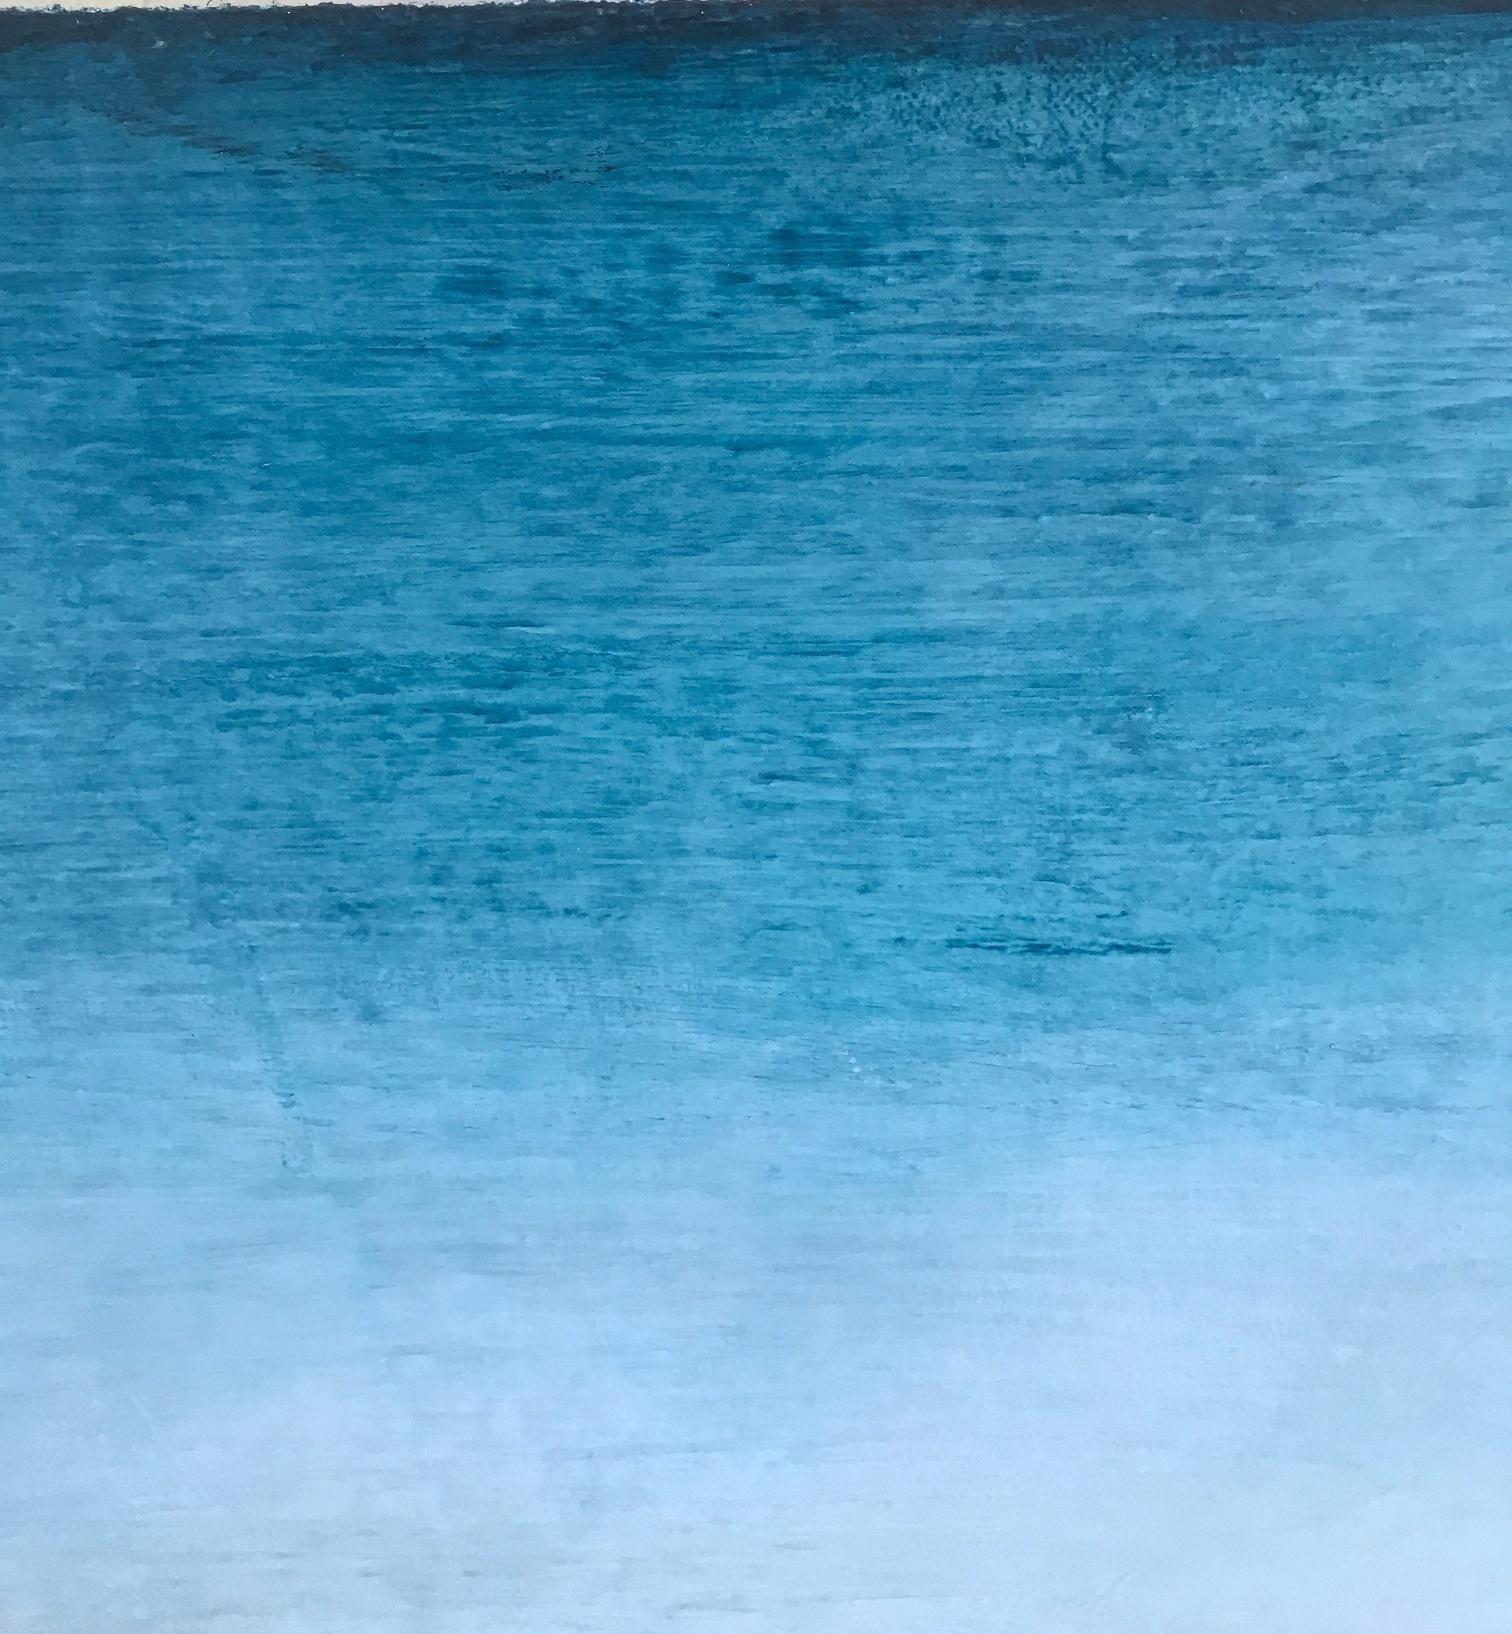 Clear Midnight, 2018, Handmade Paint on Venetian Plaster on Linen over Panel, 60 x 40 x 2 Inches in primarily blue and white. 

Shawn Dulaney's paintings are both intimate and grand with suggestions of water, atmosphere and sky, but are primarily